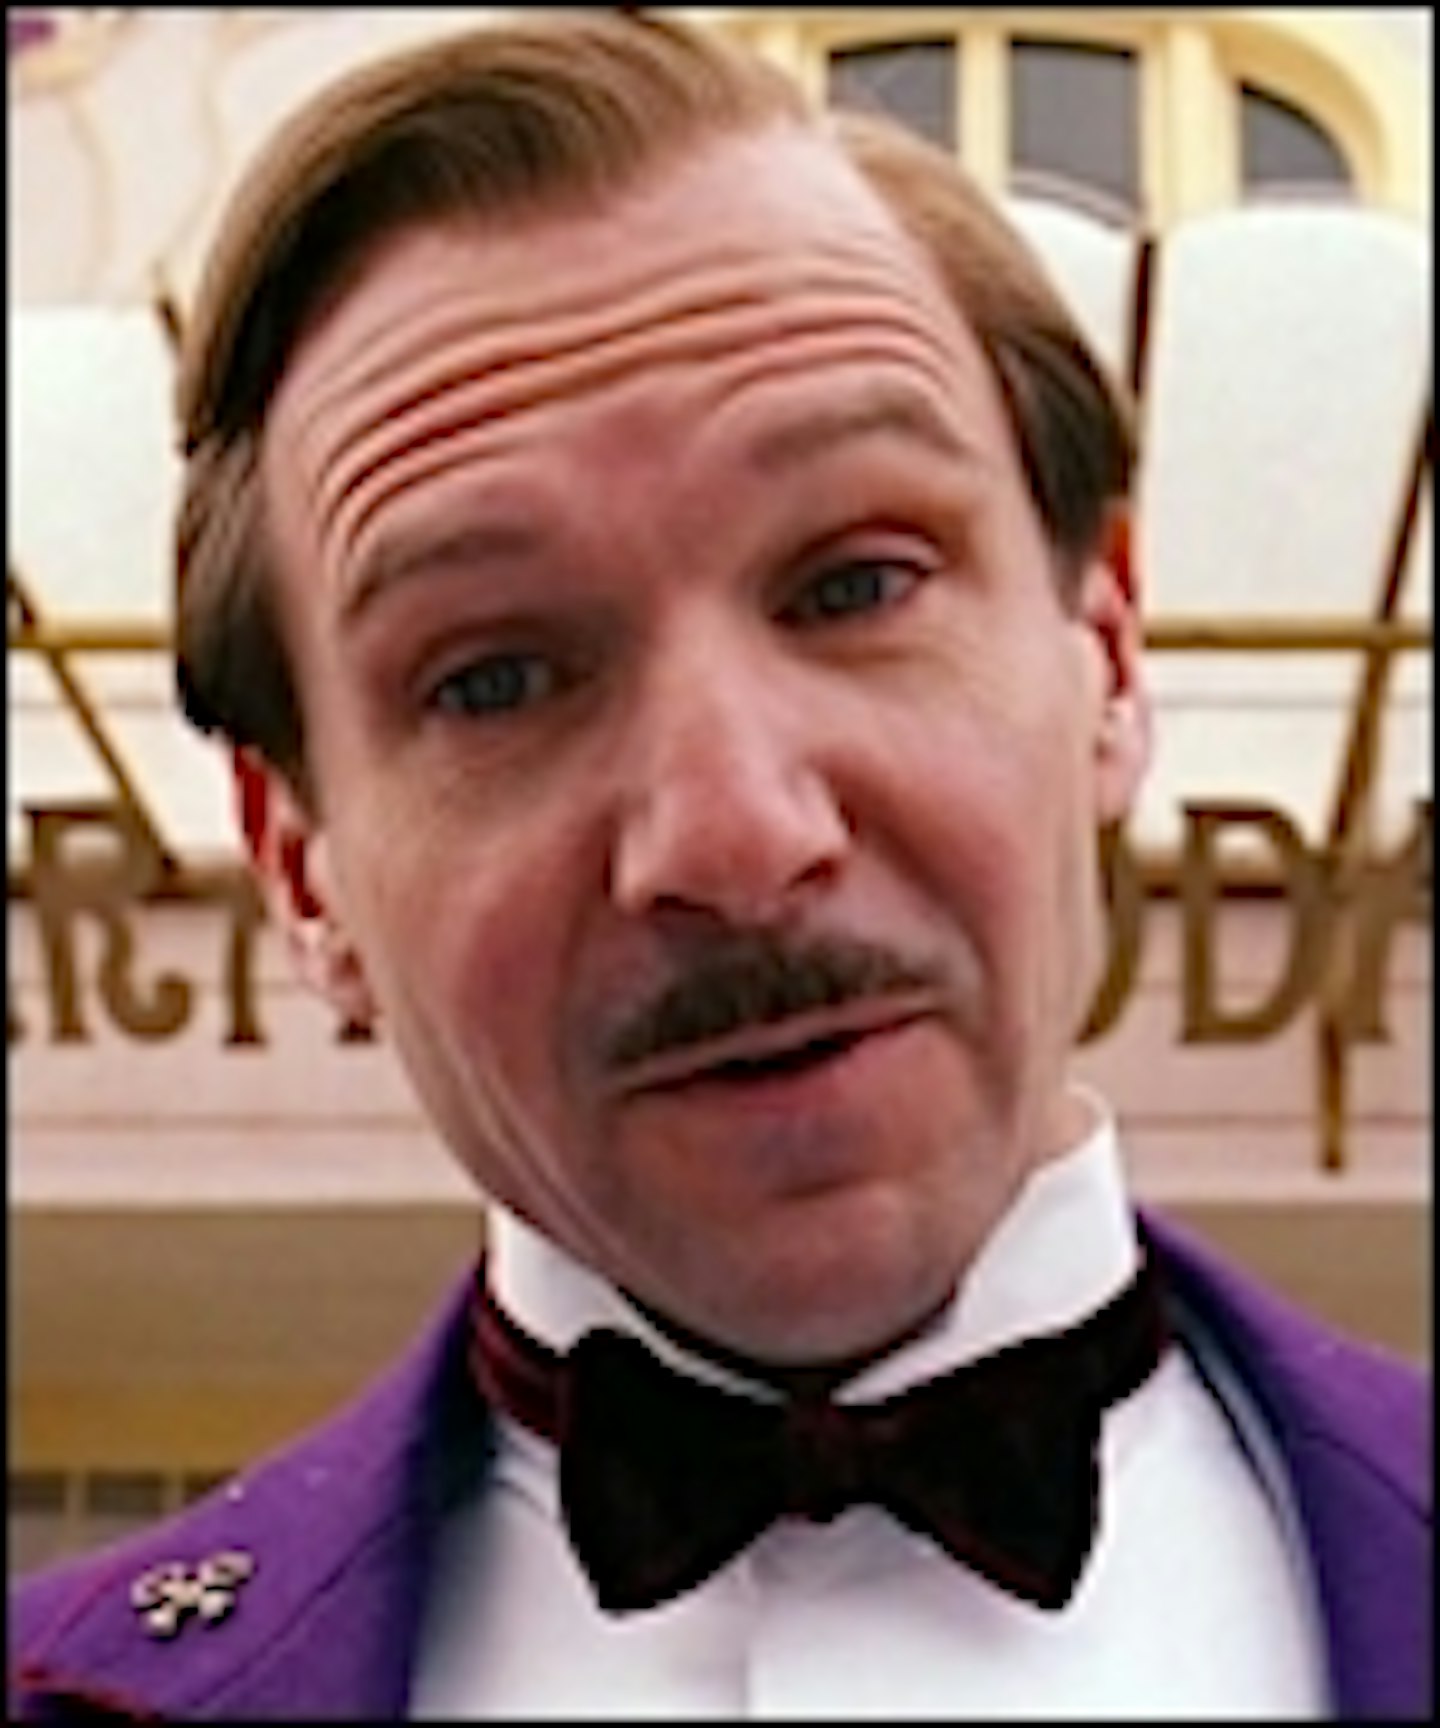 Grand Budapest Hotel Puts A Motion Poster Online